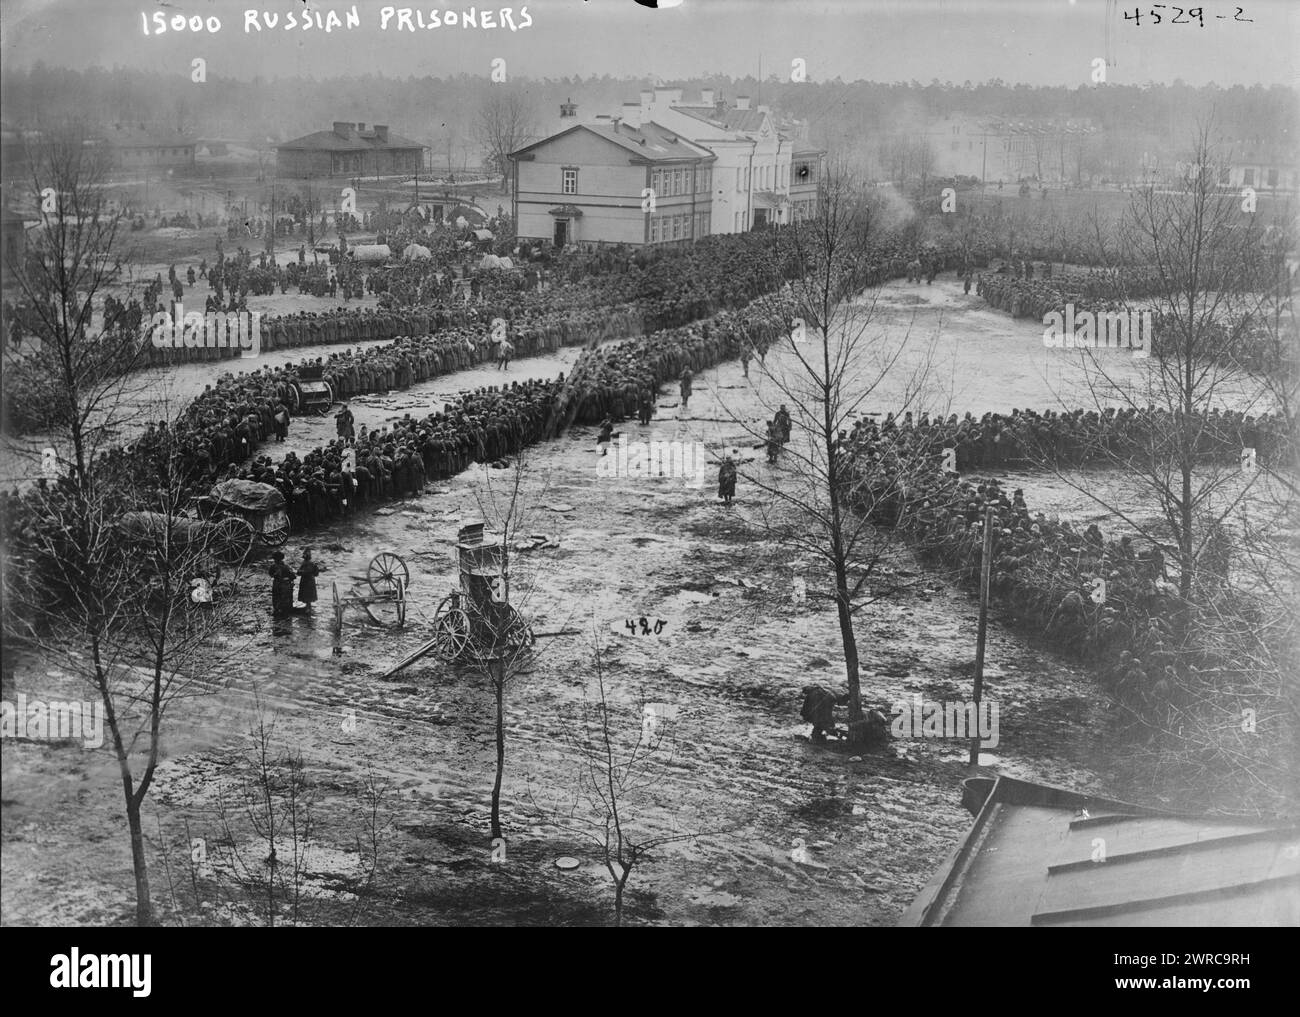 15,000 Russian prisoners, Photograph shows Russian prisoners under German control in Augustów, now northeast Poland during World War I., 1915 February, World War, 1914-1918, Glass negatives, 1 negative: glass Stock Photo